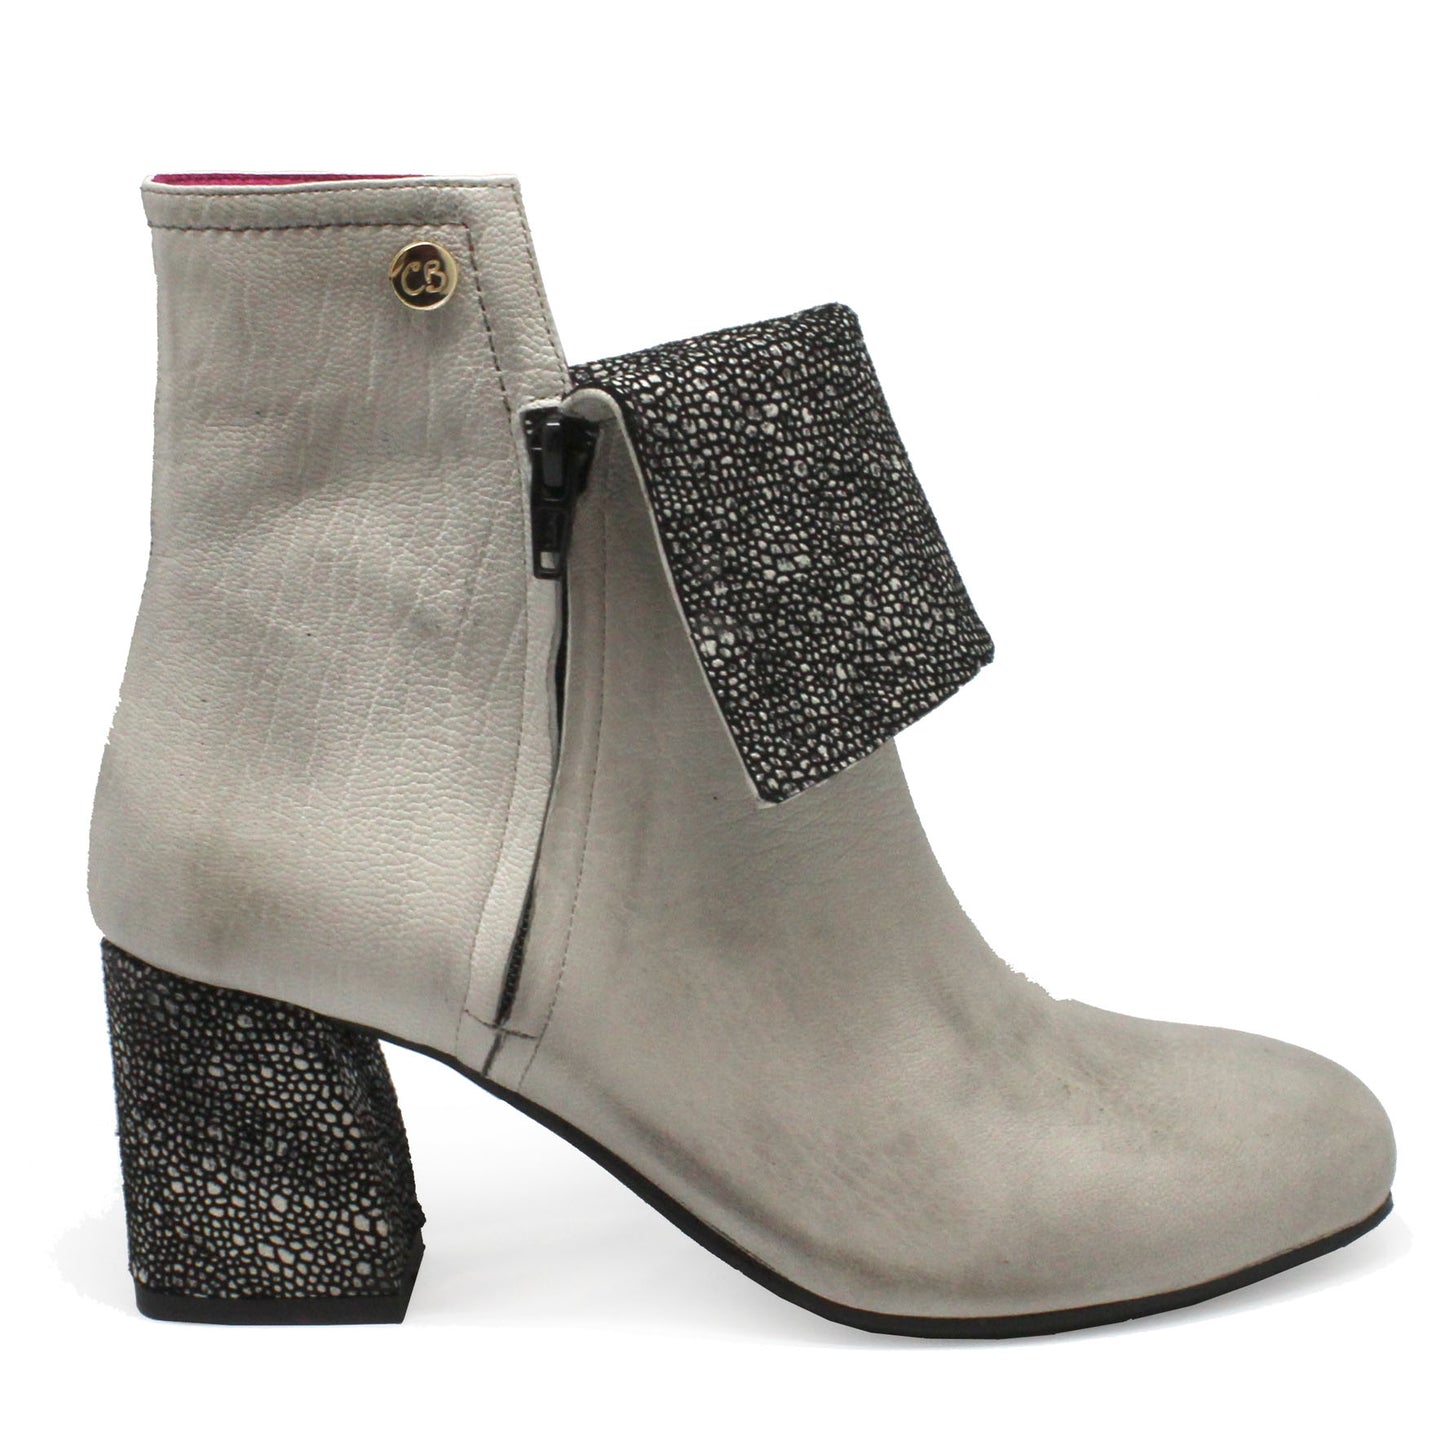 Mais Bien - White/Black ankle boot- Last pairs 36 and 38